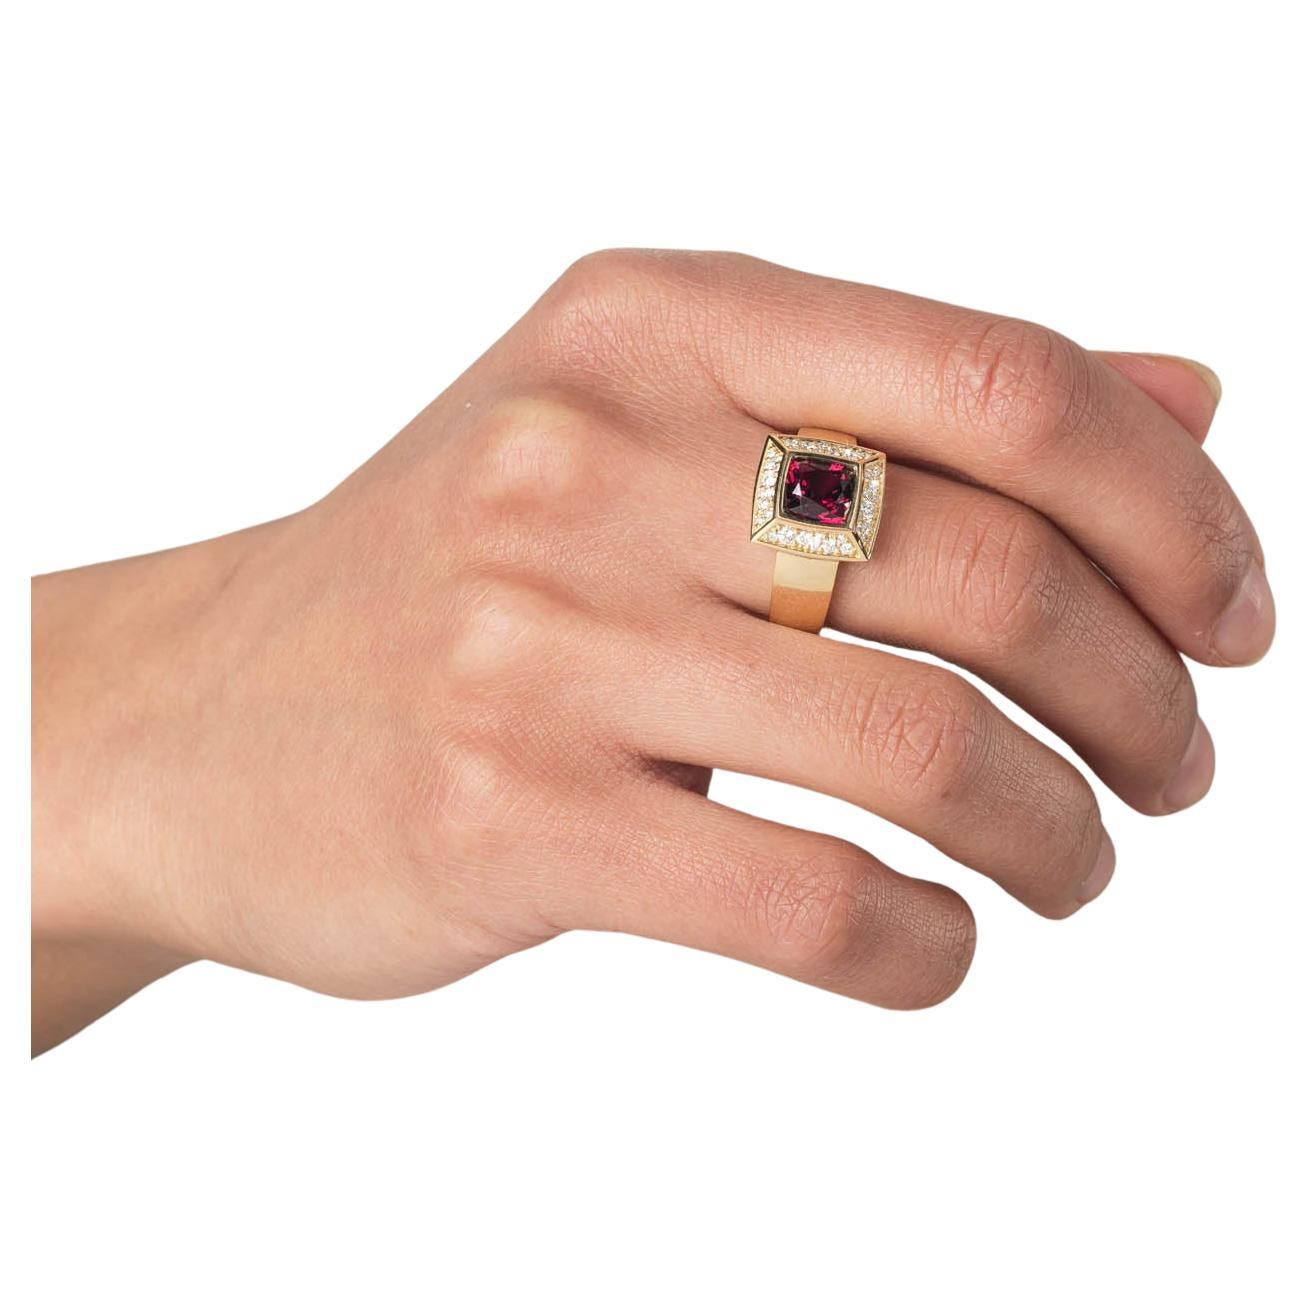 Cober “Balas Cushion” 2.37 Carat Deep Red Spinel & 0.36 Ct Diamonds Ring   In New Condition For Sale In OSS, NH